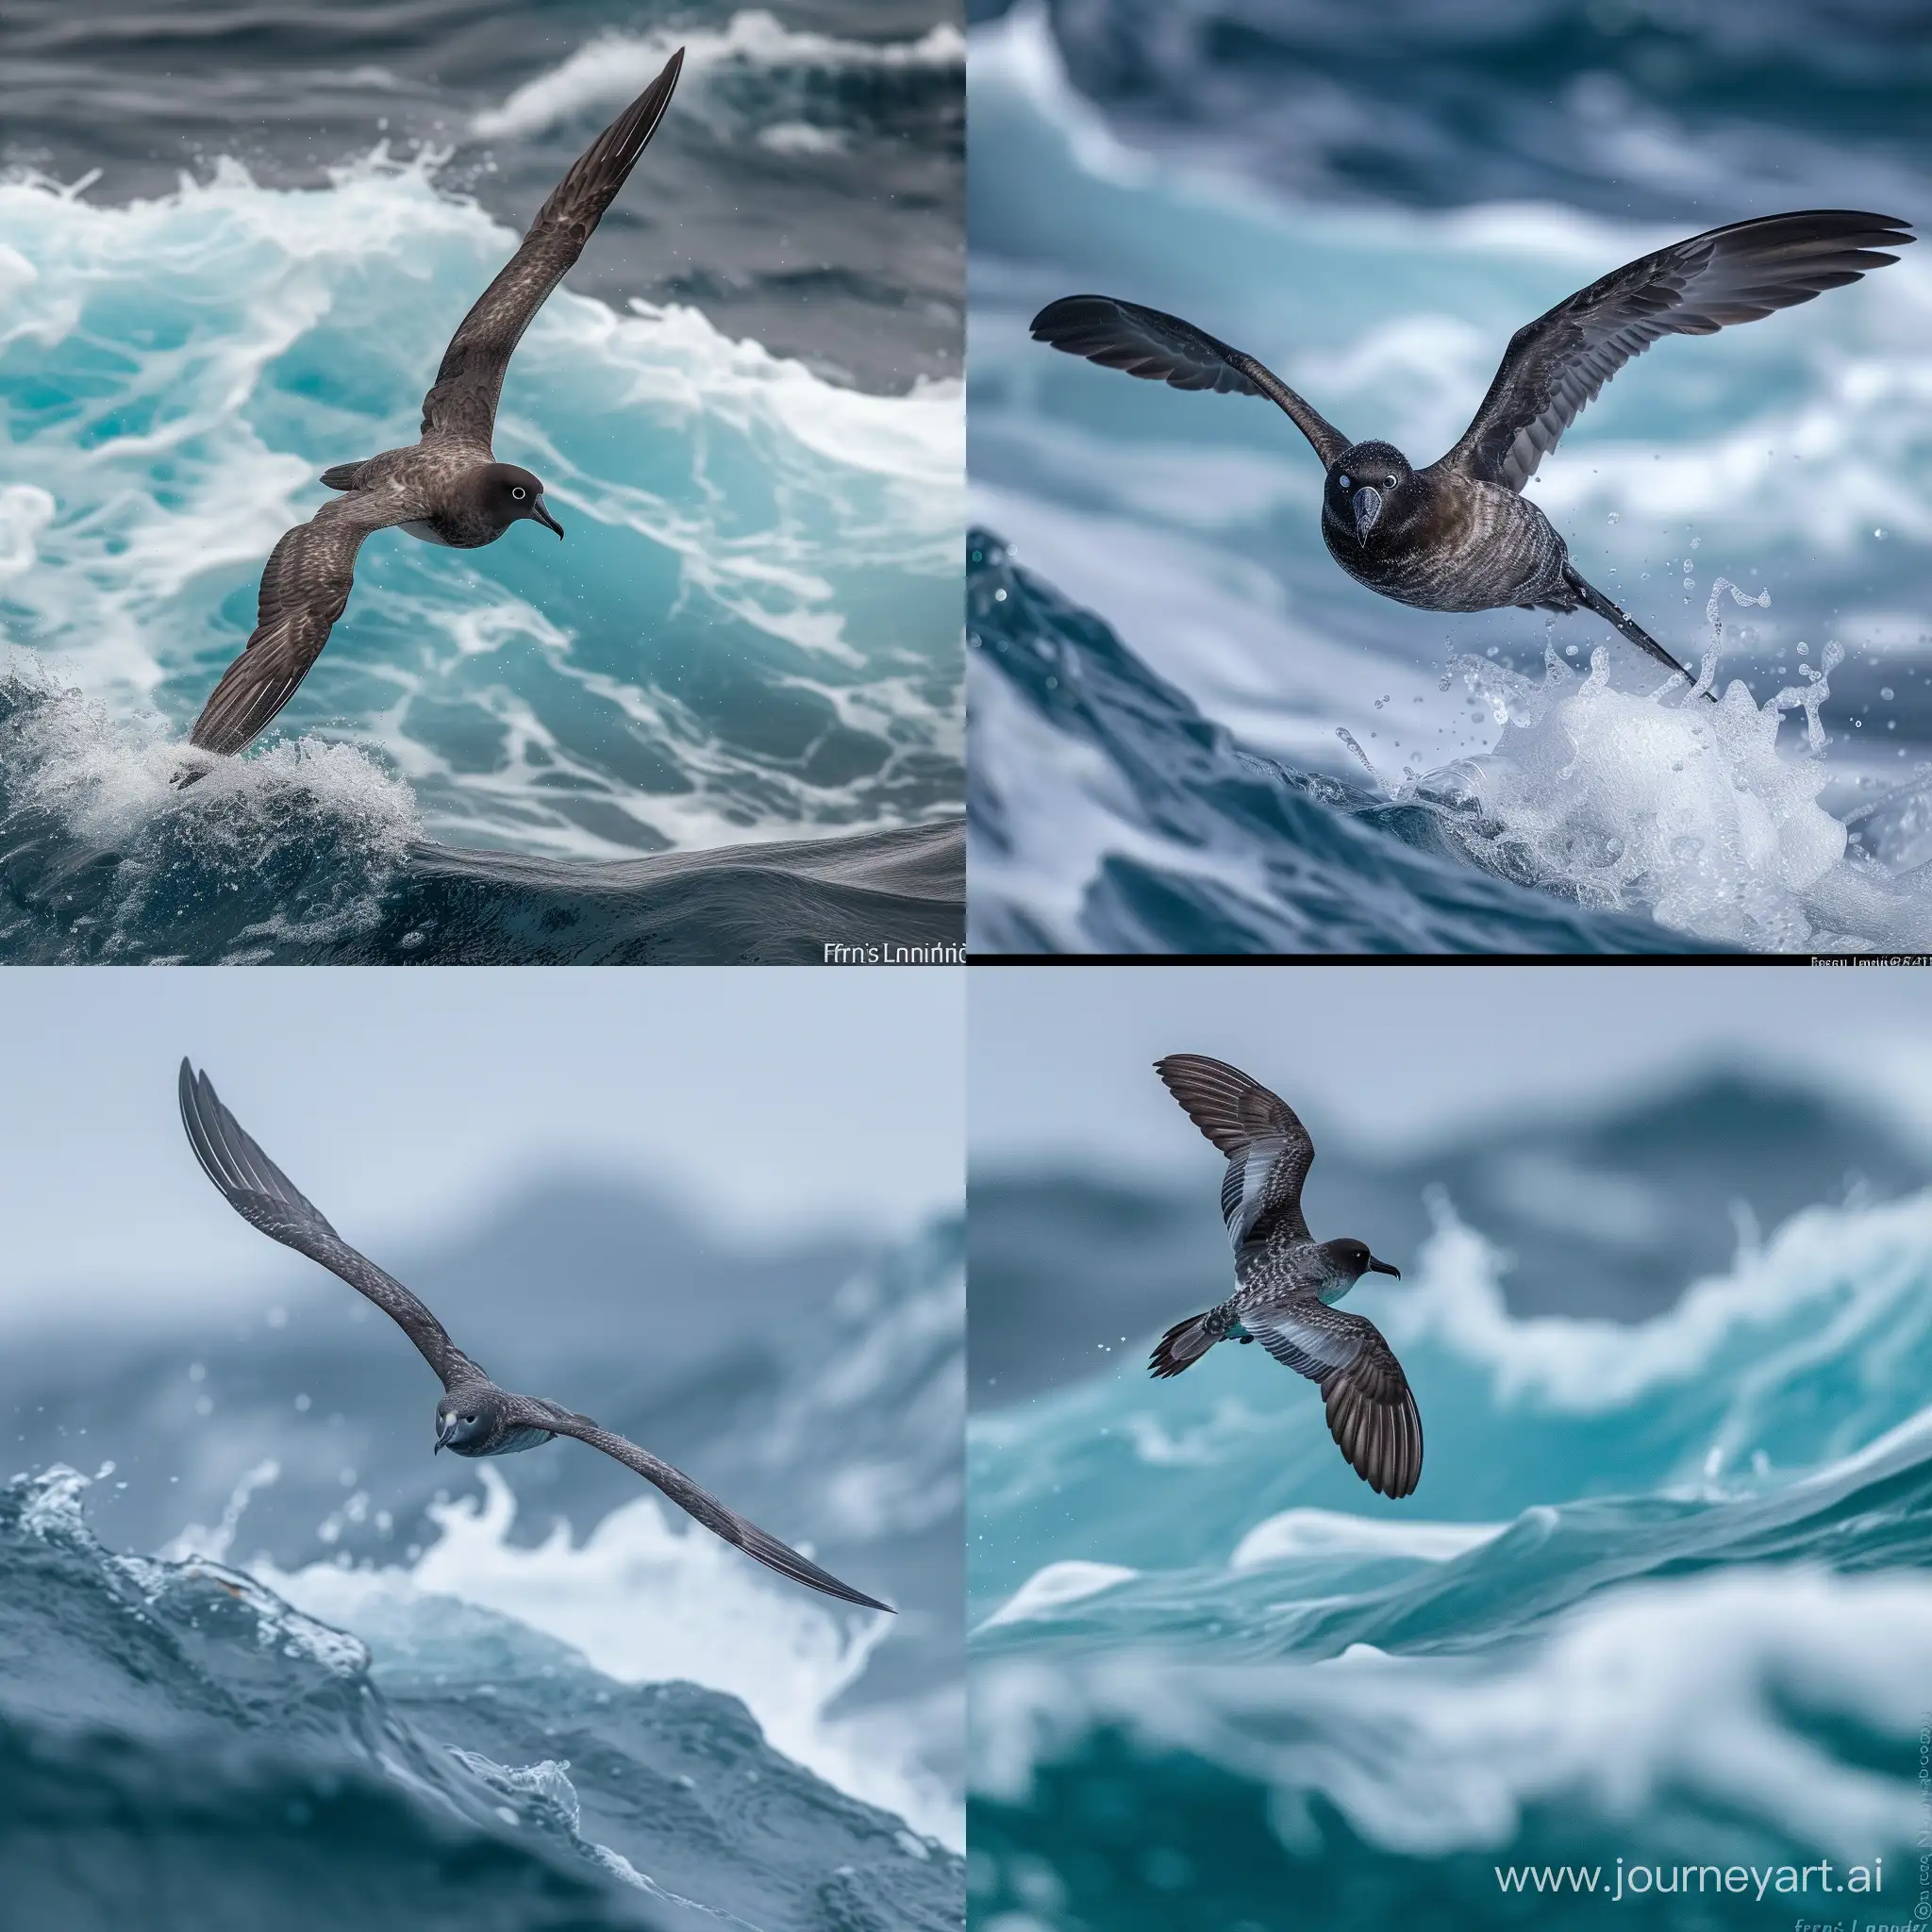 award winning wildlife photo of a 6 inch long petrel bird with a 15 foot wingspan, gliding over choppy ocean waves, canon camera, supertelephoto lens, dramatic, crisp, Frans Lanting, nature documentary, entire bird in frame